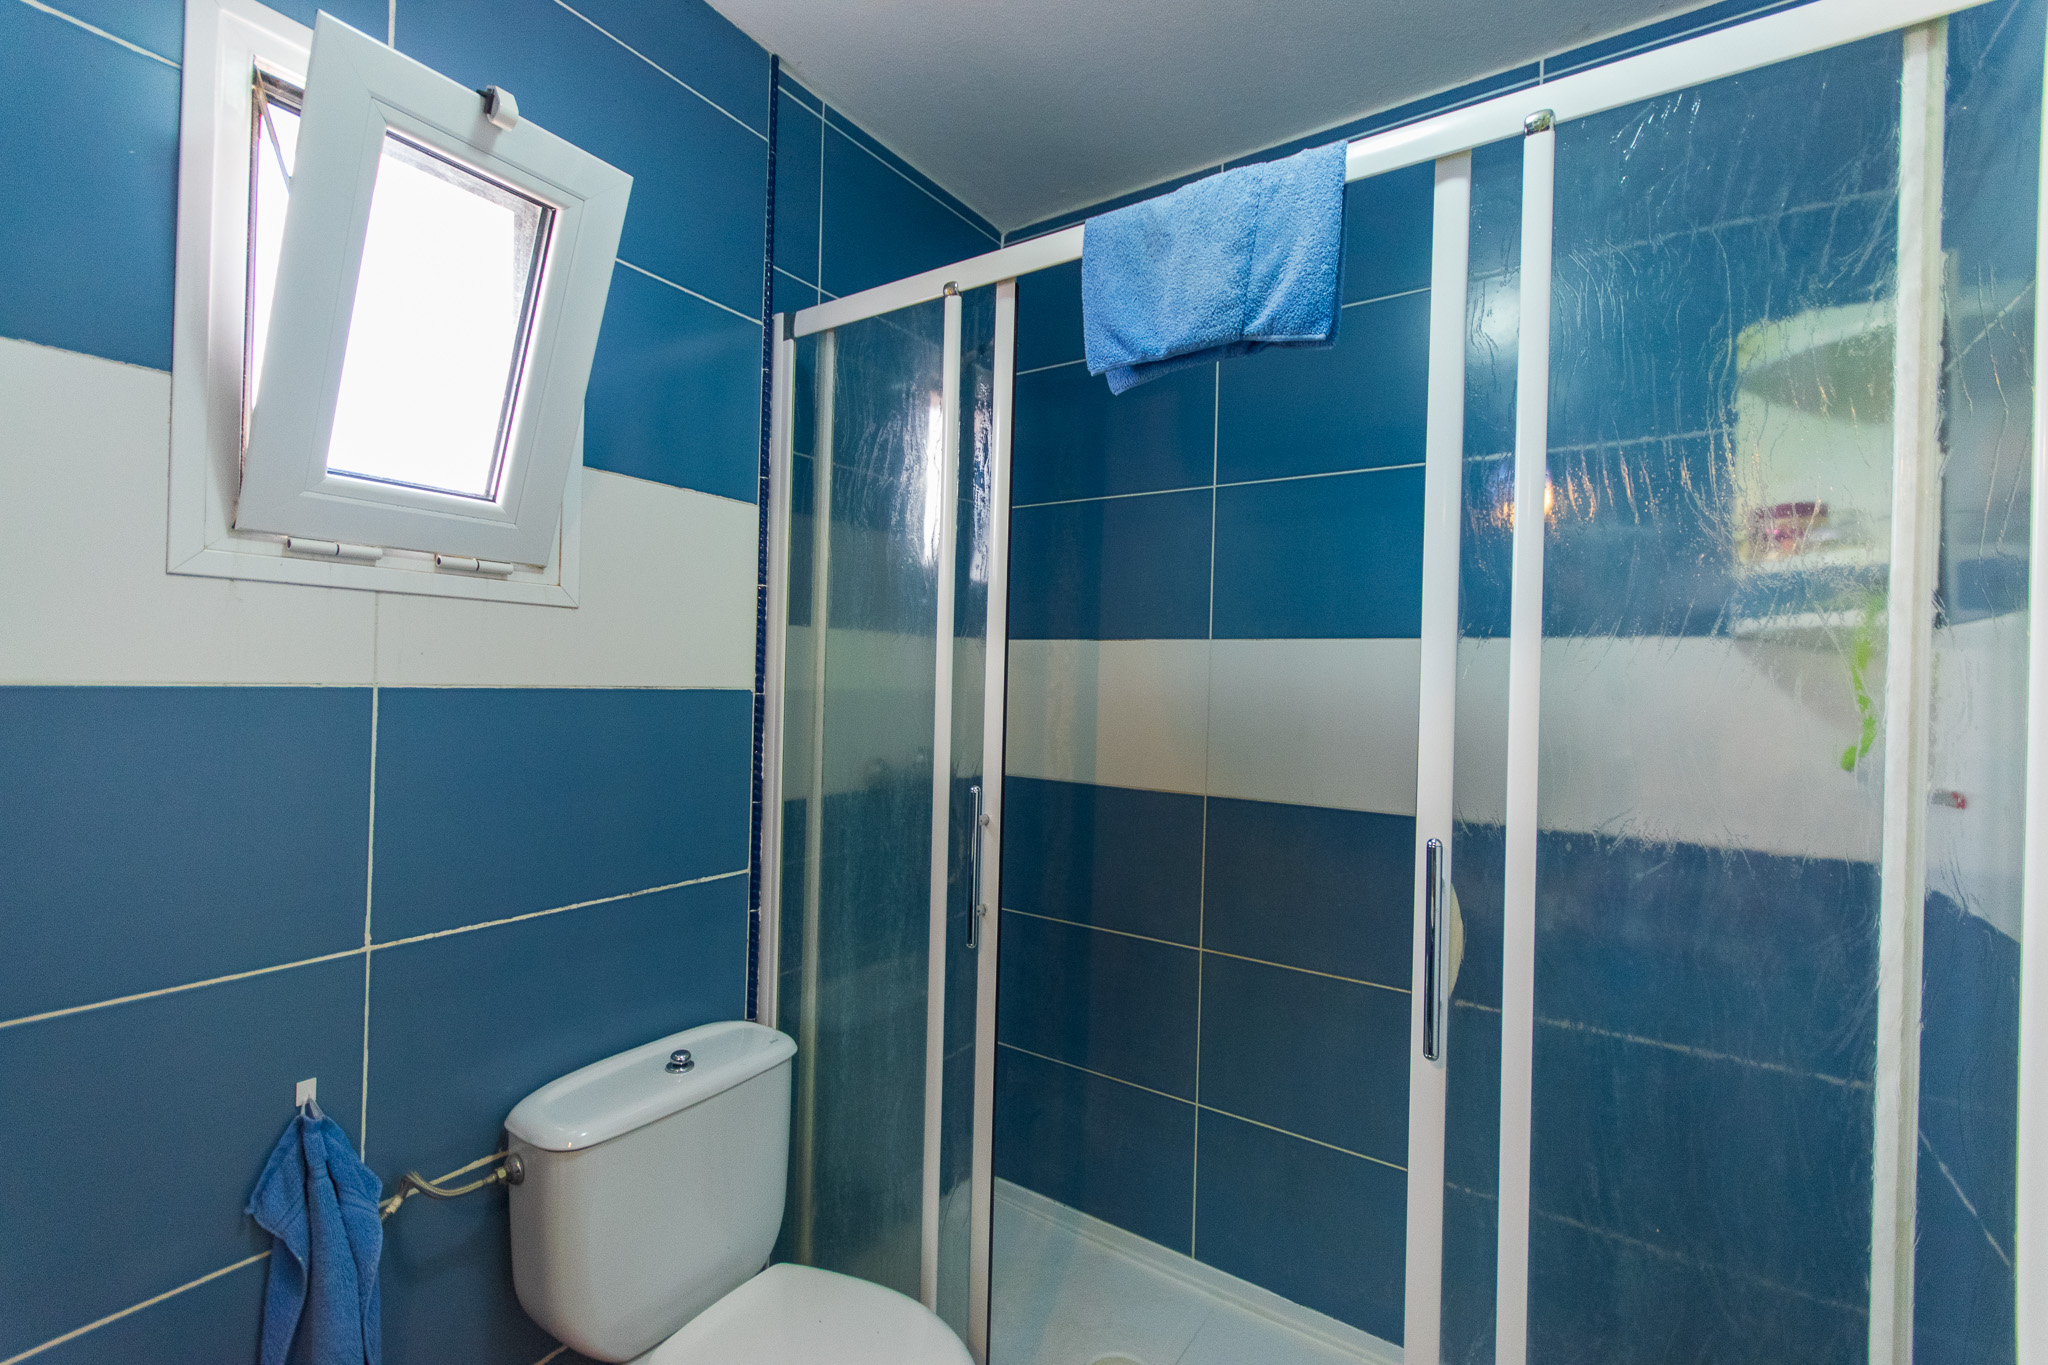 Bathroom Two Bedroom Townhouse for Sale in Cales Coves